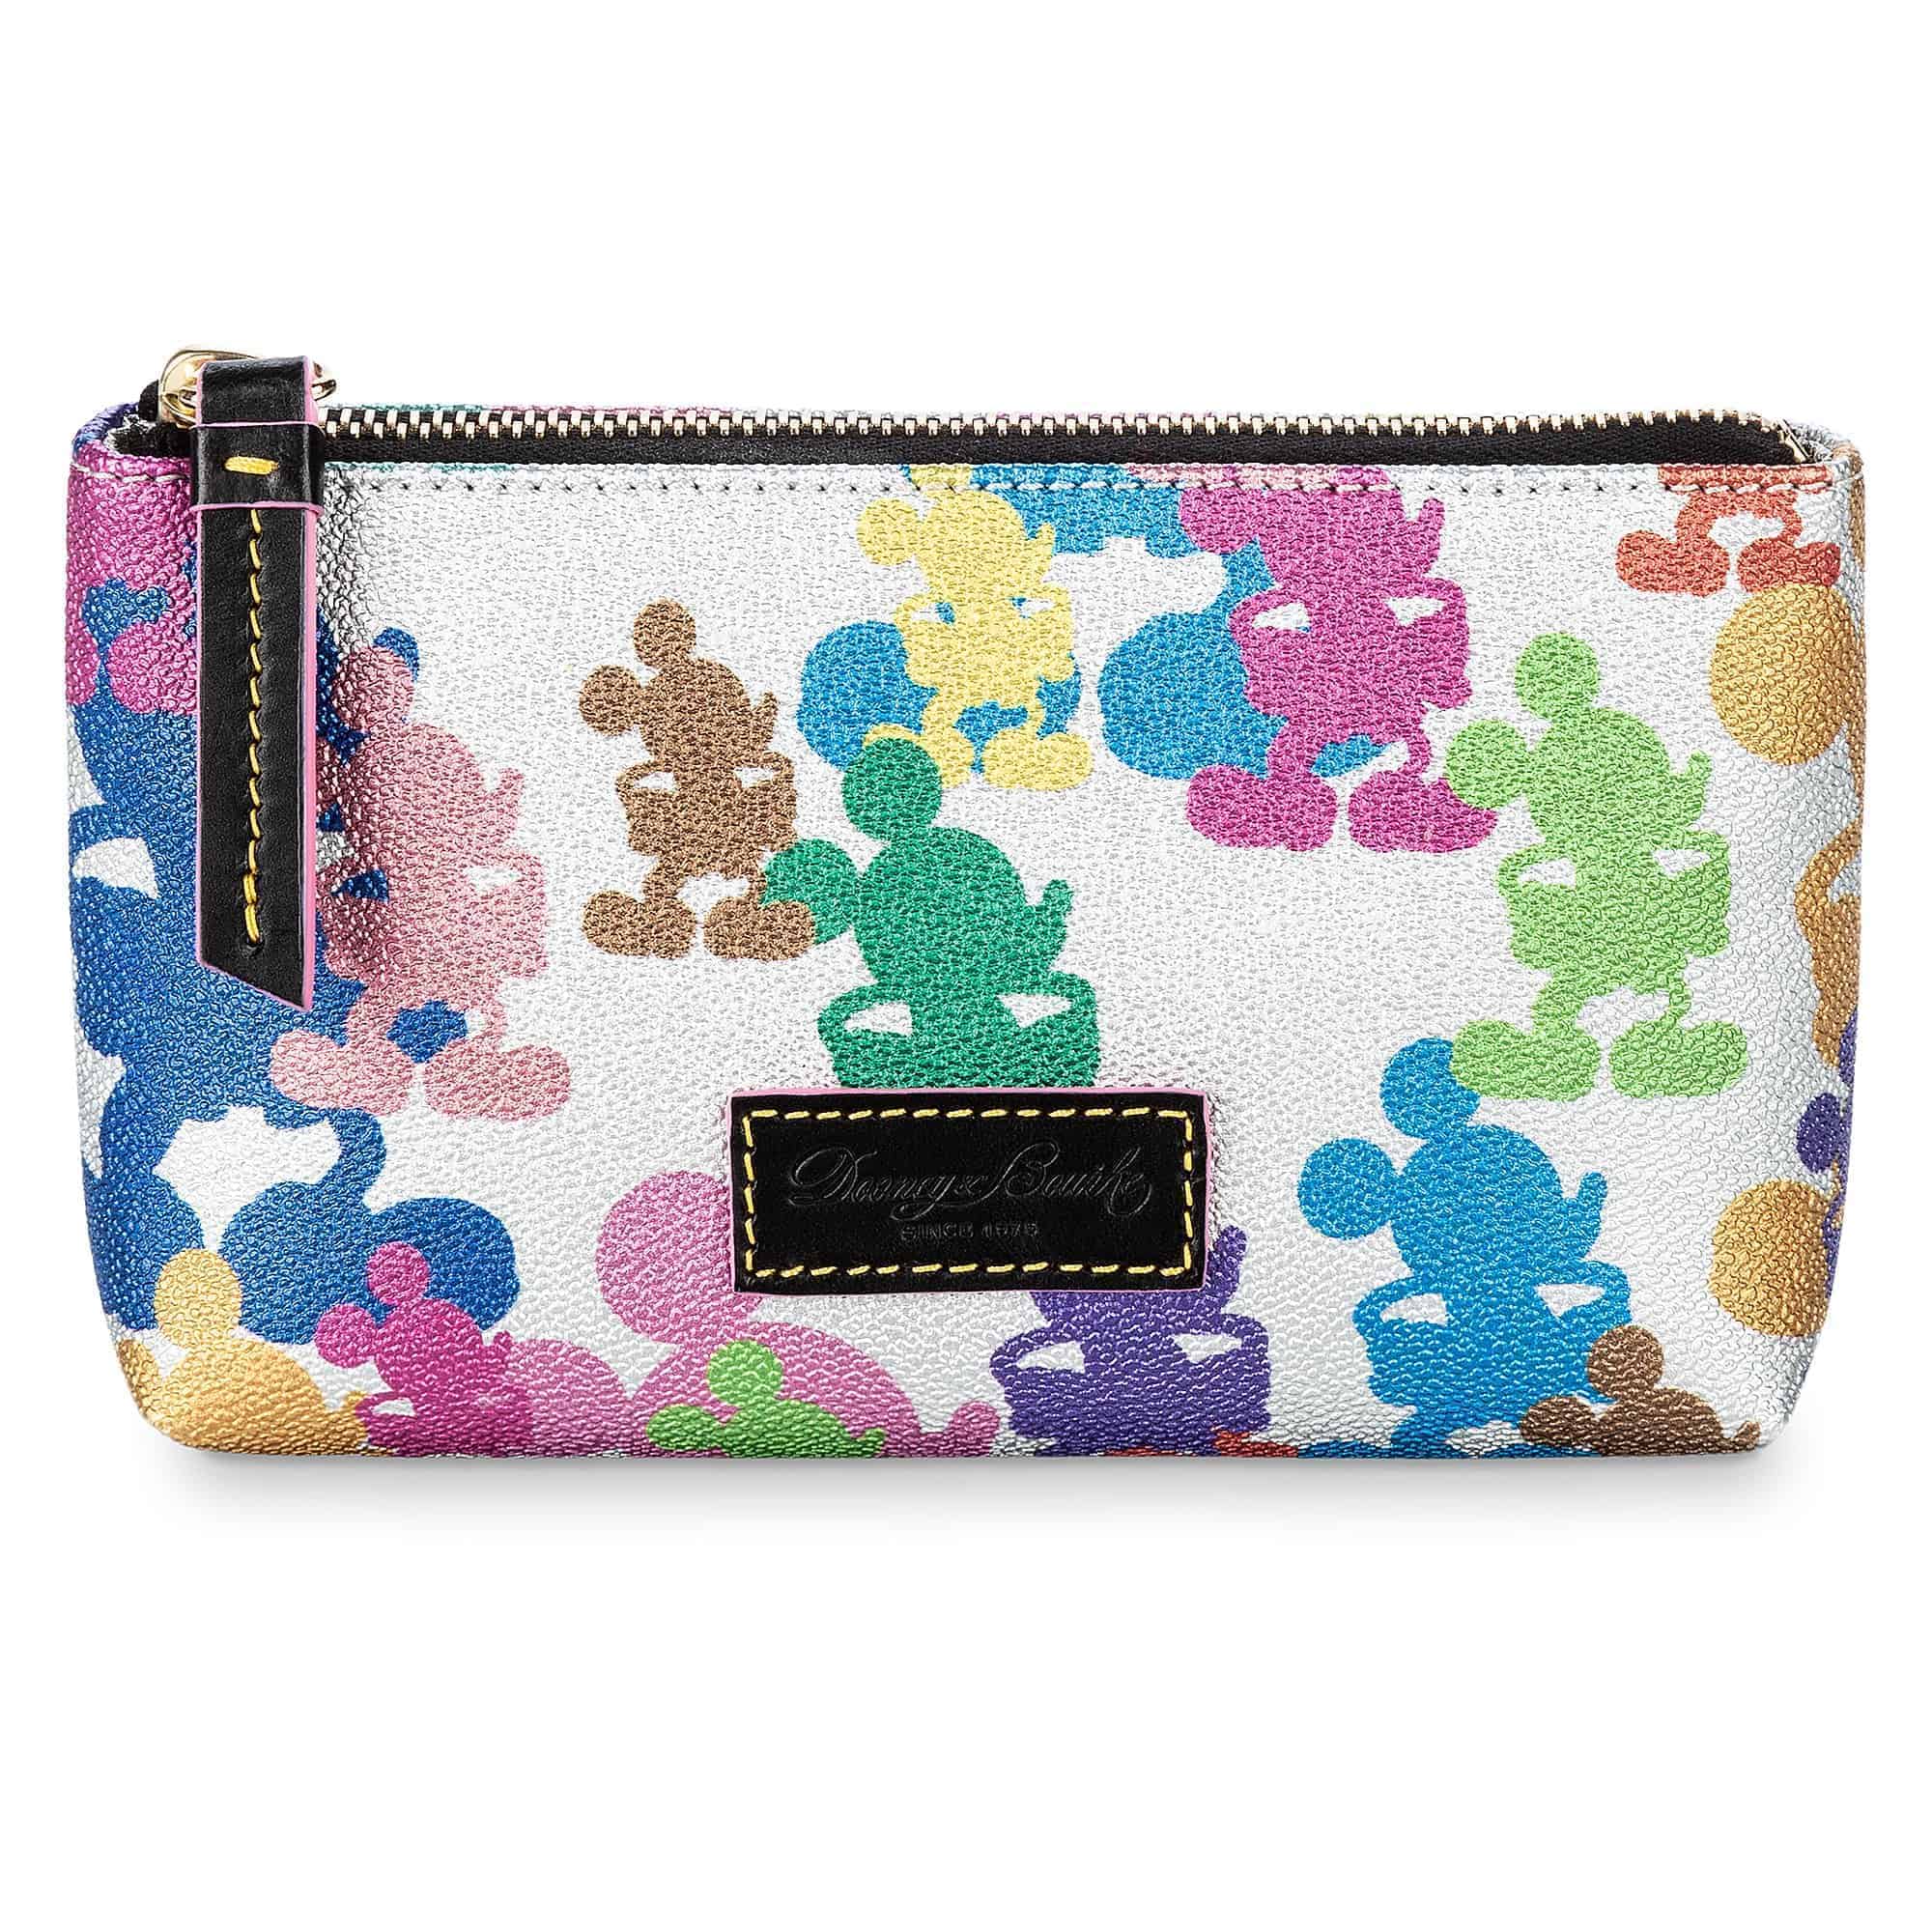 Mickey Mouse Silver Cosmetic Bag by Dooney & Bourke – 10th Anniversary